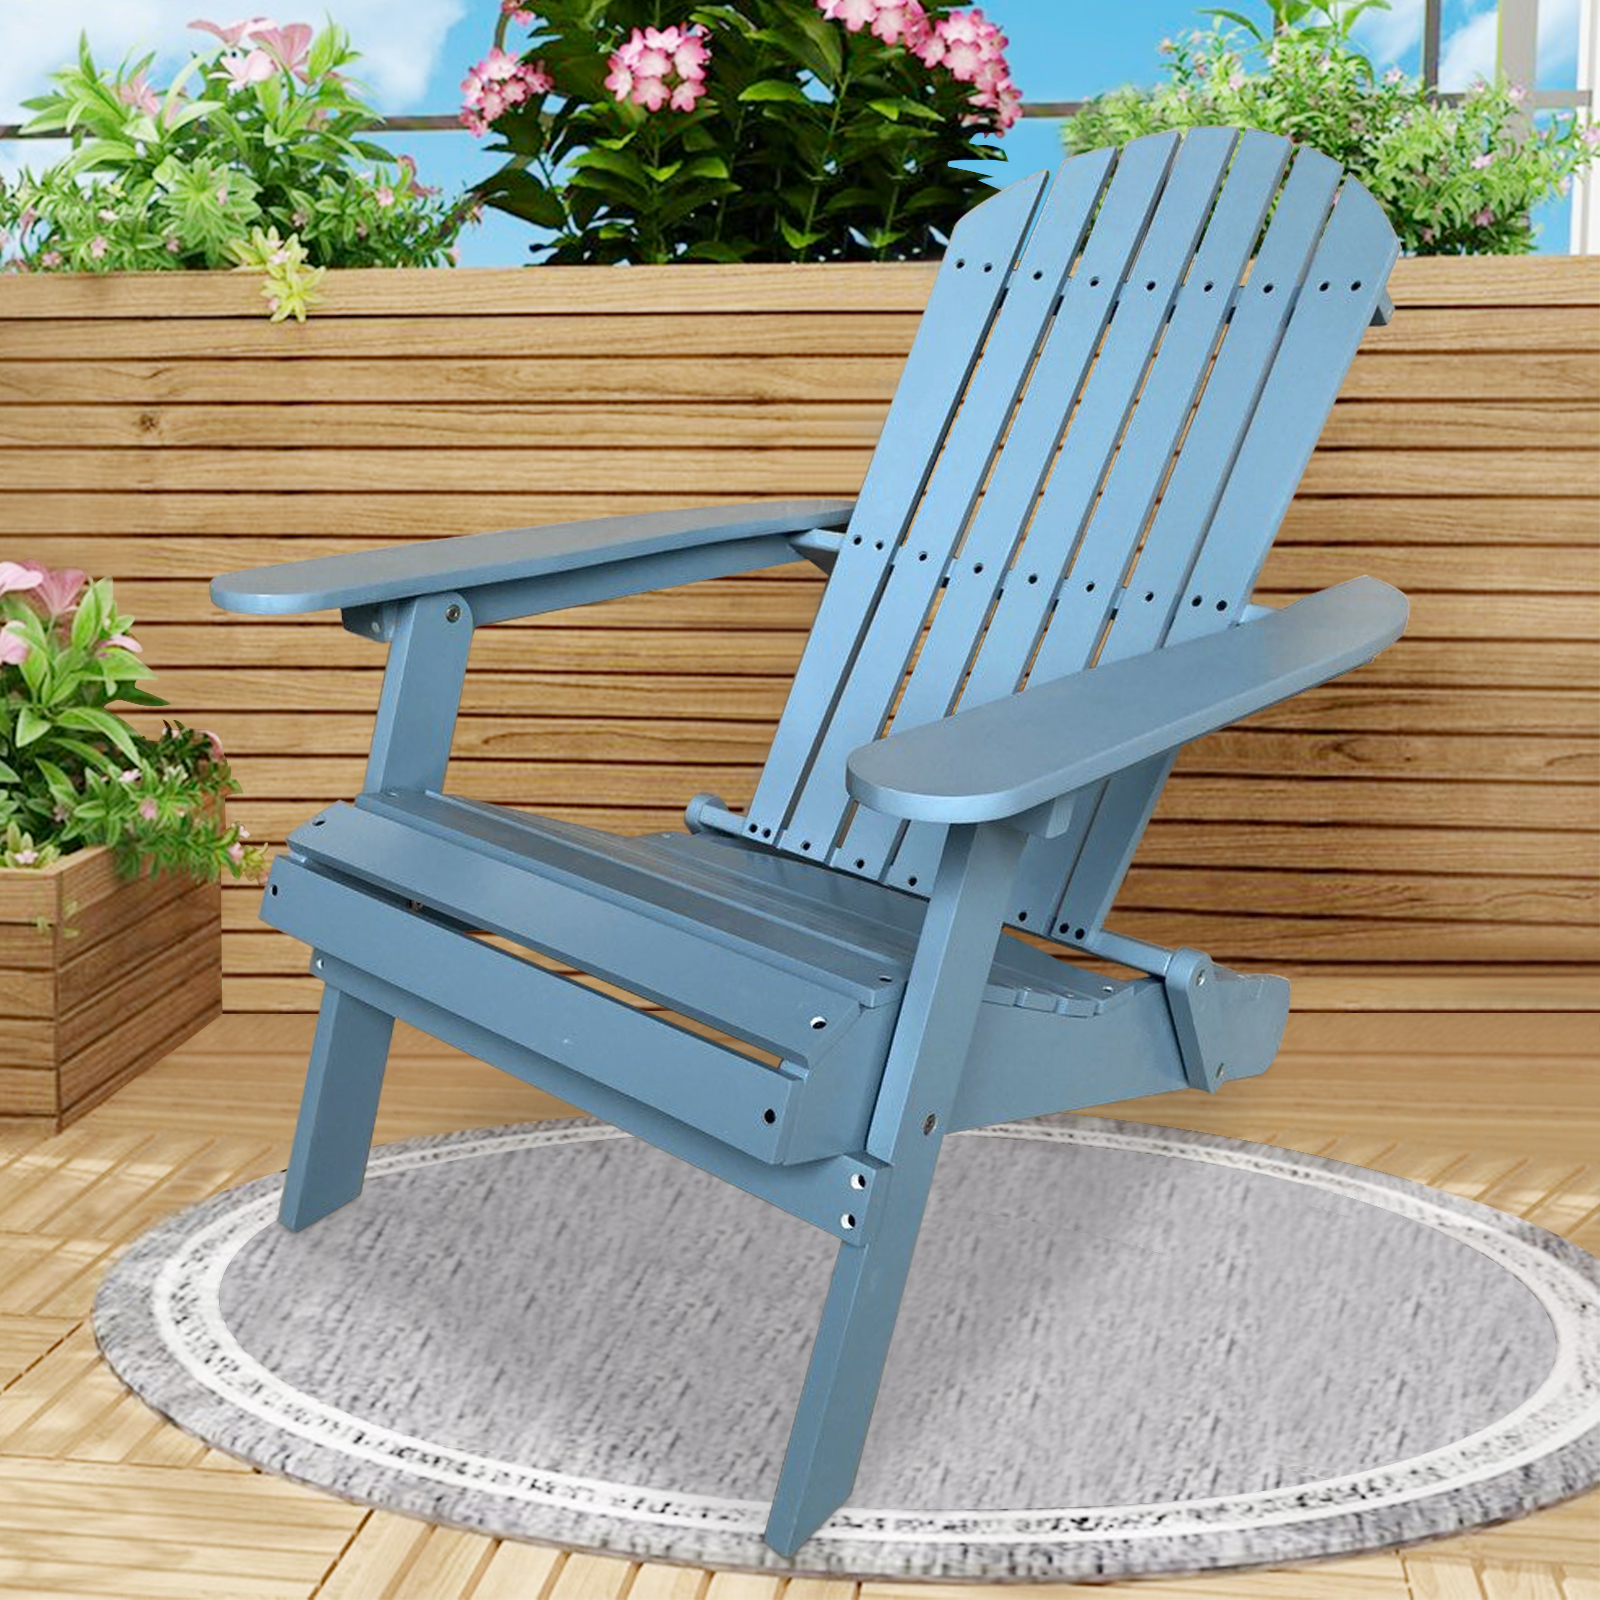 Adirondack Chair Outdoor Folding Wooden Adirondack Lounger Chair Patio Chair Lawn Chair for Adults, Turquoise, Blue - image 1 of 7